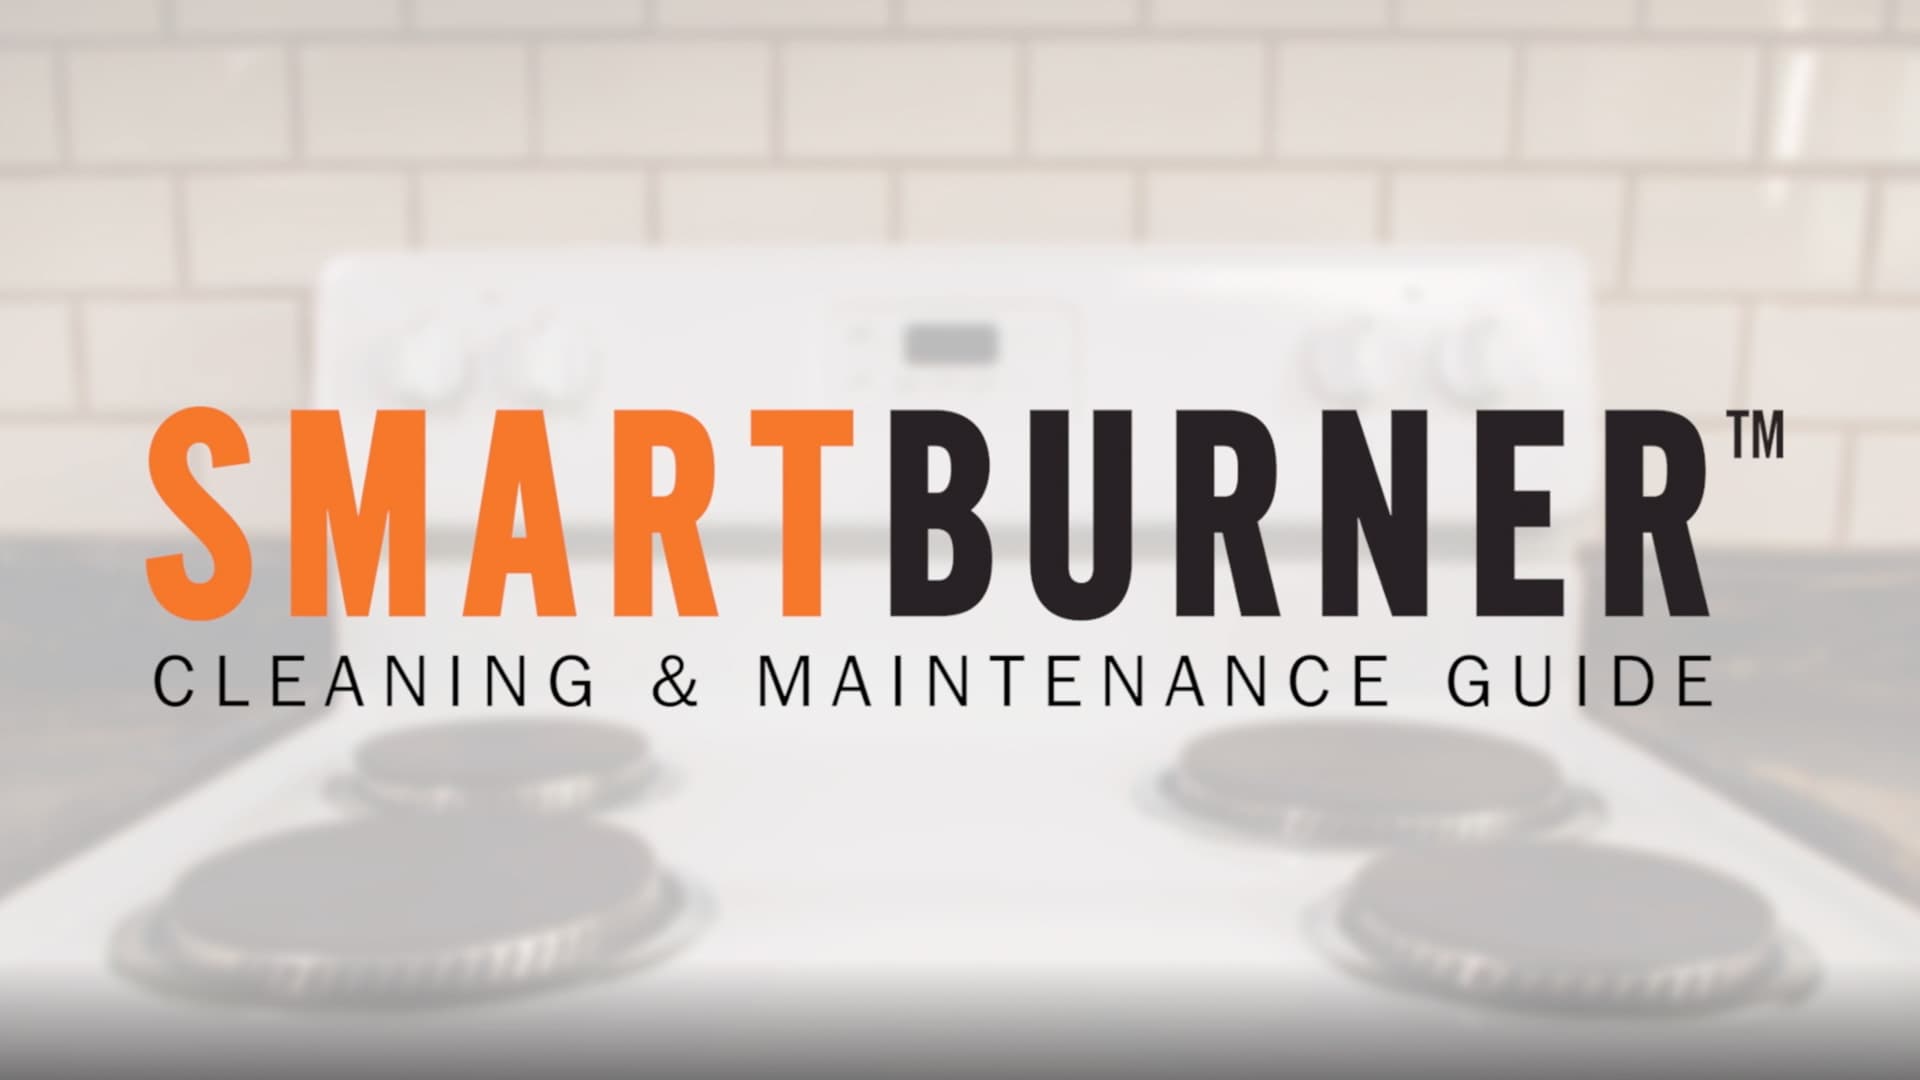 SmartBurner™ cleaning and maintenance guide